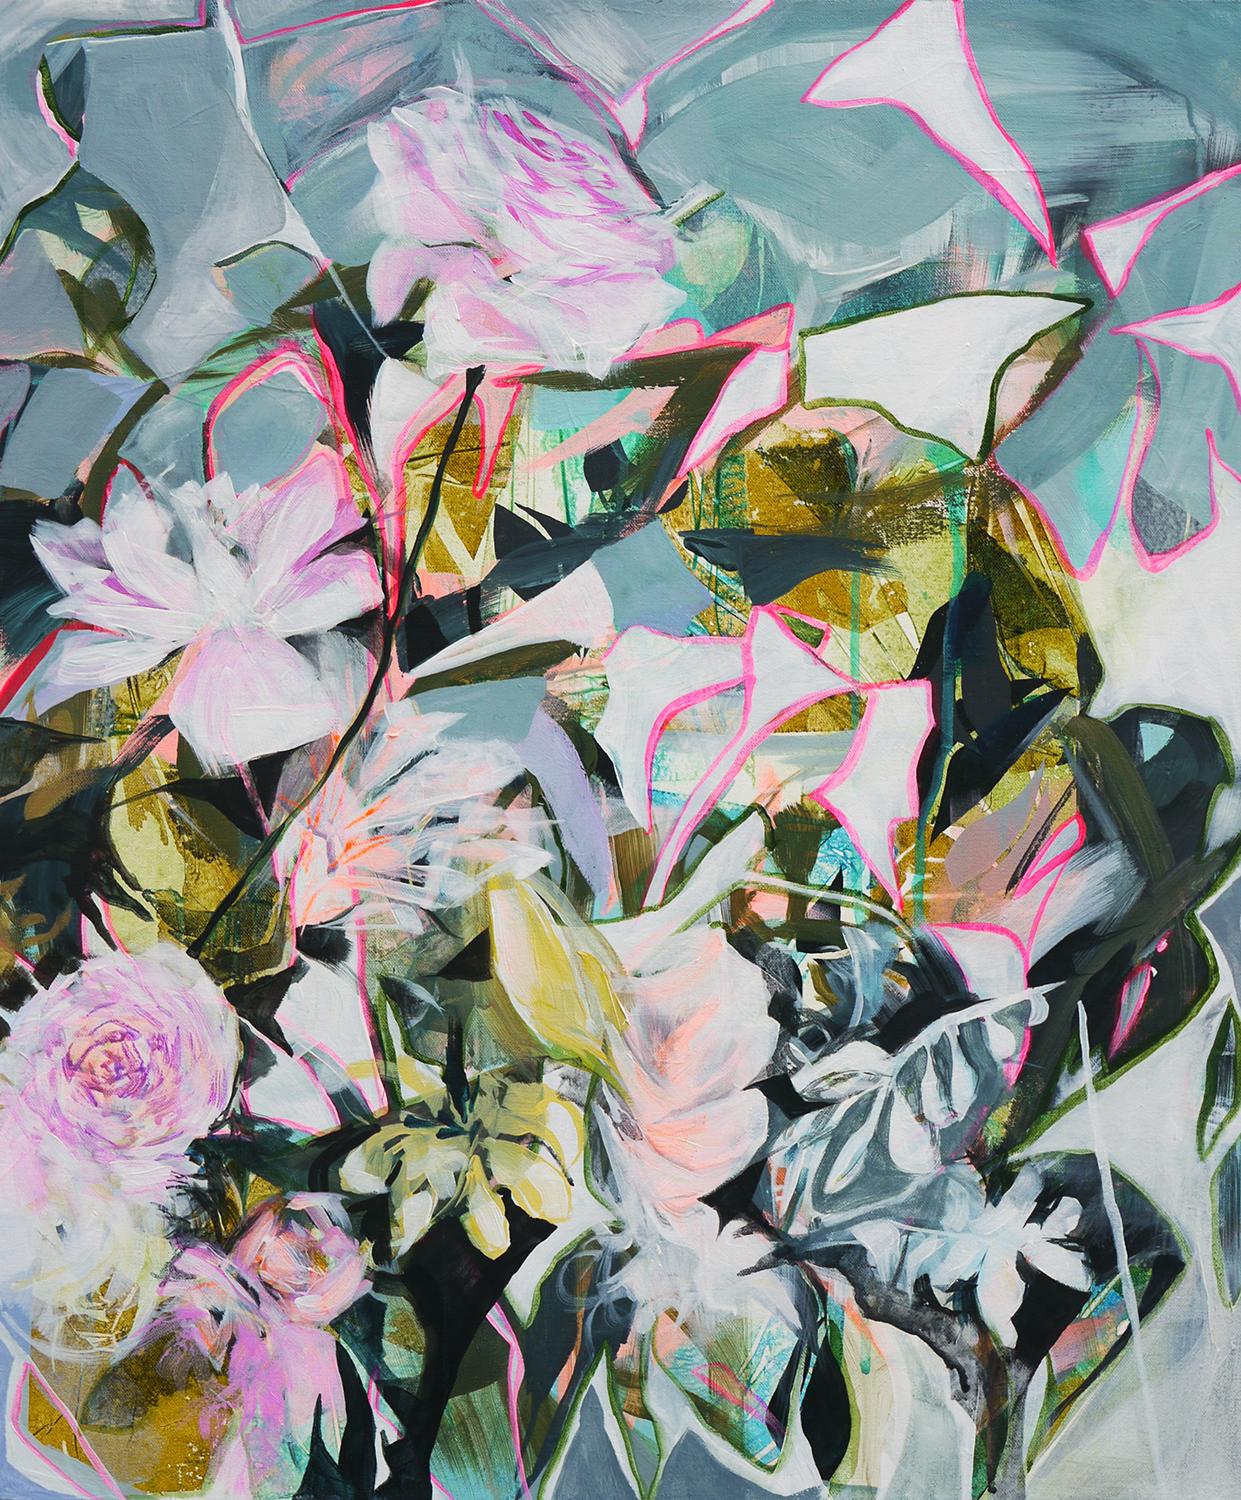 <p>Artist Comments<br>Abstracted garden scene inspired by collage and paper cutout studies. "I look for ambiguous shapes and vibrations of color that I can bring to the surface," explains Manty. "My work is abstract and intuitive, but it is also